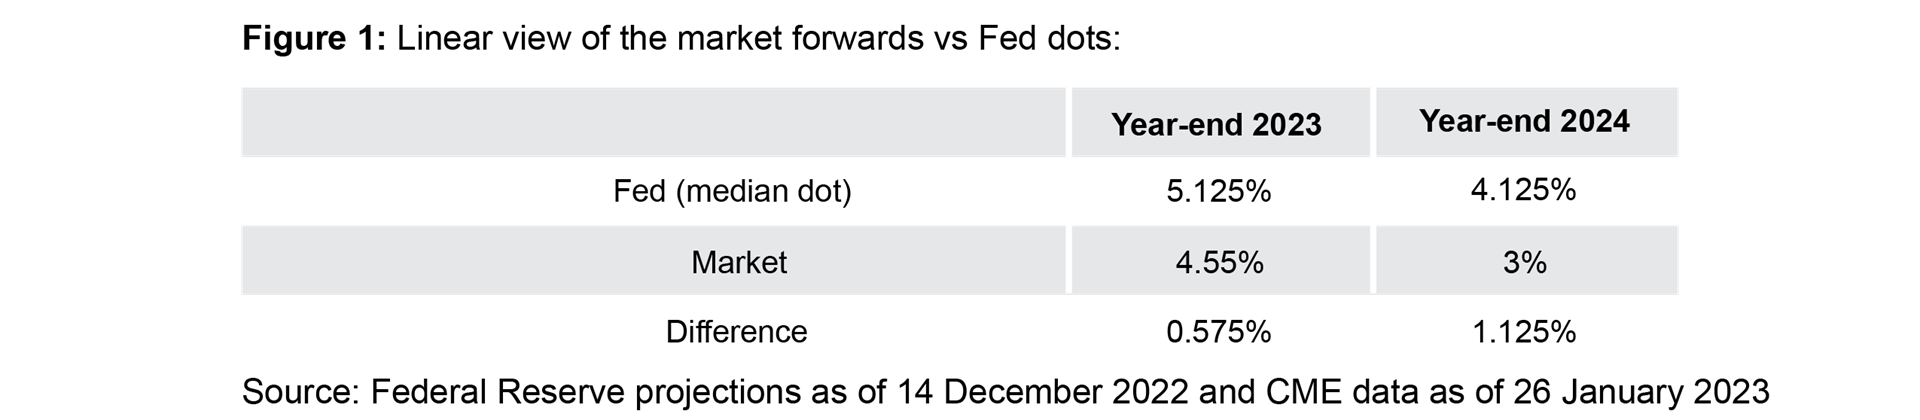 Figure 1 is a table that compares forward market-based measures of interest-rate expectations with Federal Reserve officials’ median policy rate projections. The table shows the market expectation is 0.575 percentage point below the median Fed projection for year-end 2023 and 1.125 percentage point below the Fed projection for year-end 2024.